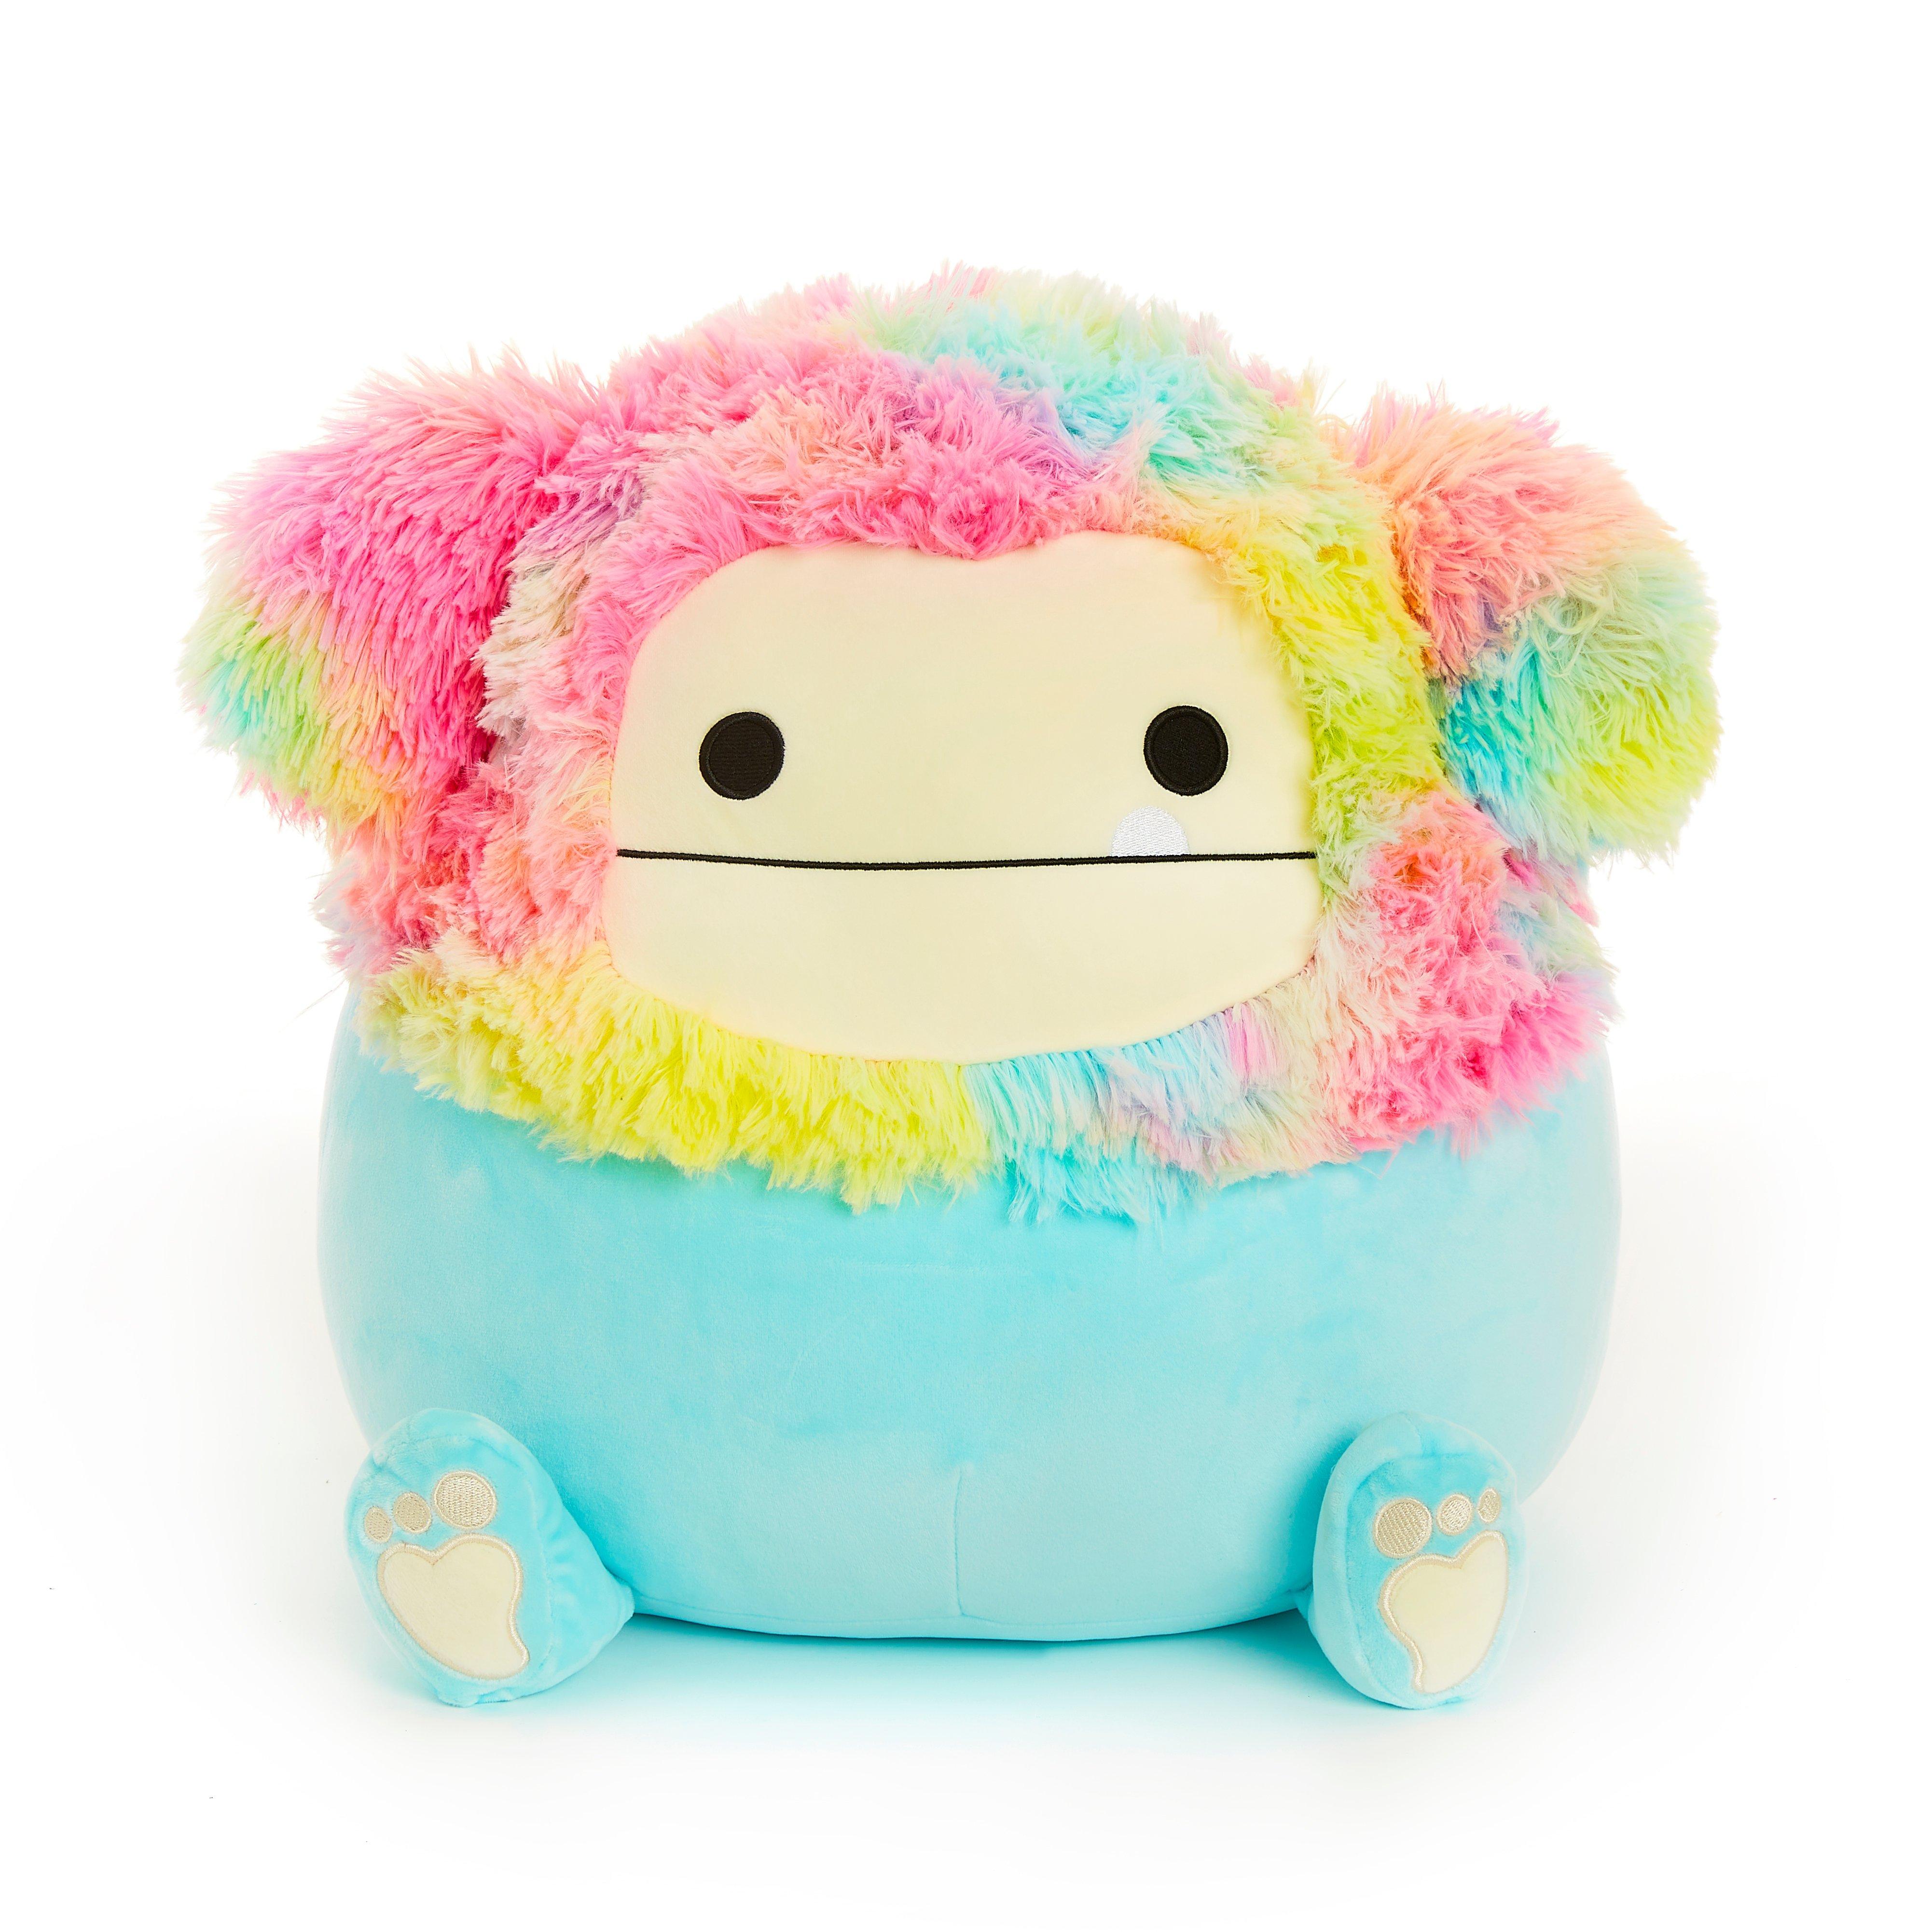 Squishmallows Fall Big Foot 16 inch Plush Toy for sale online 